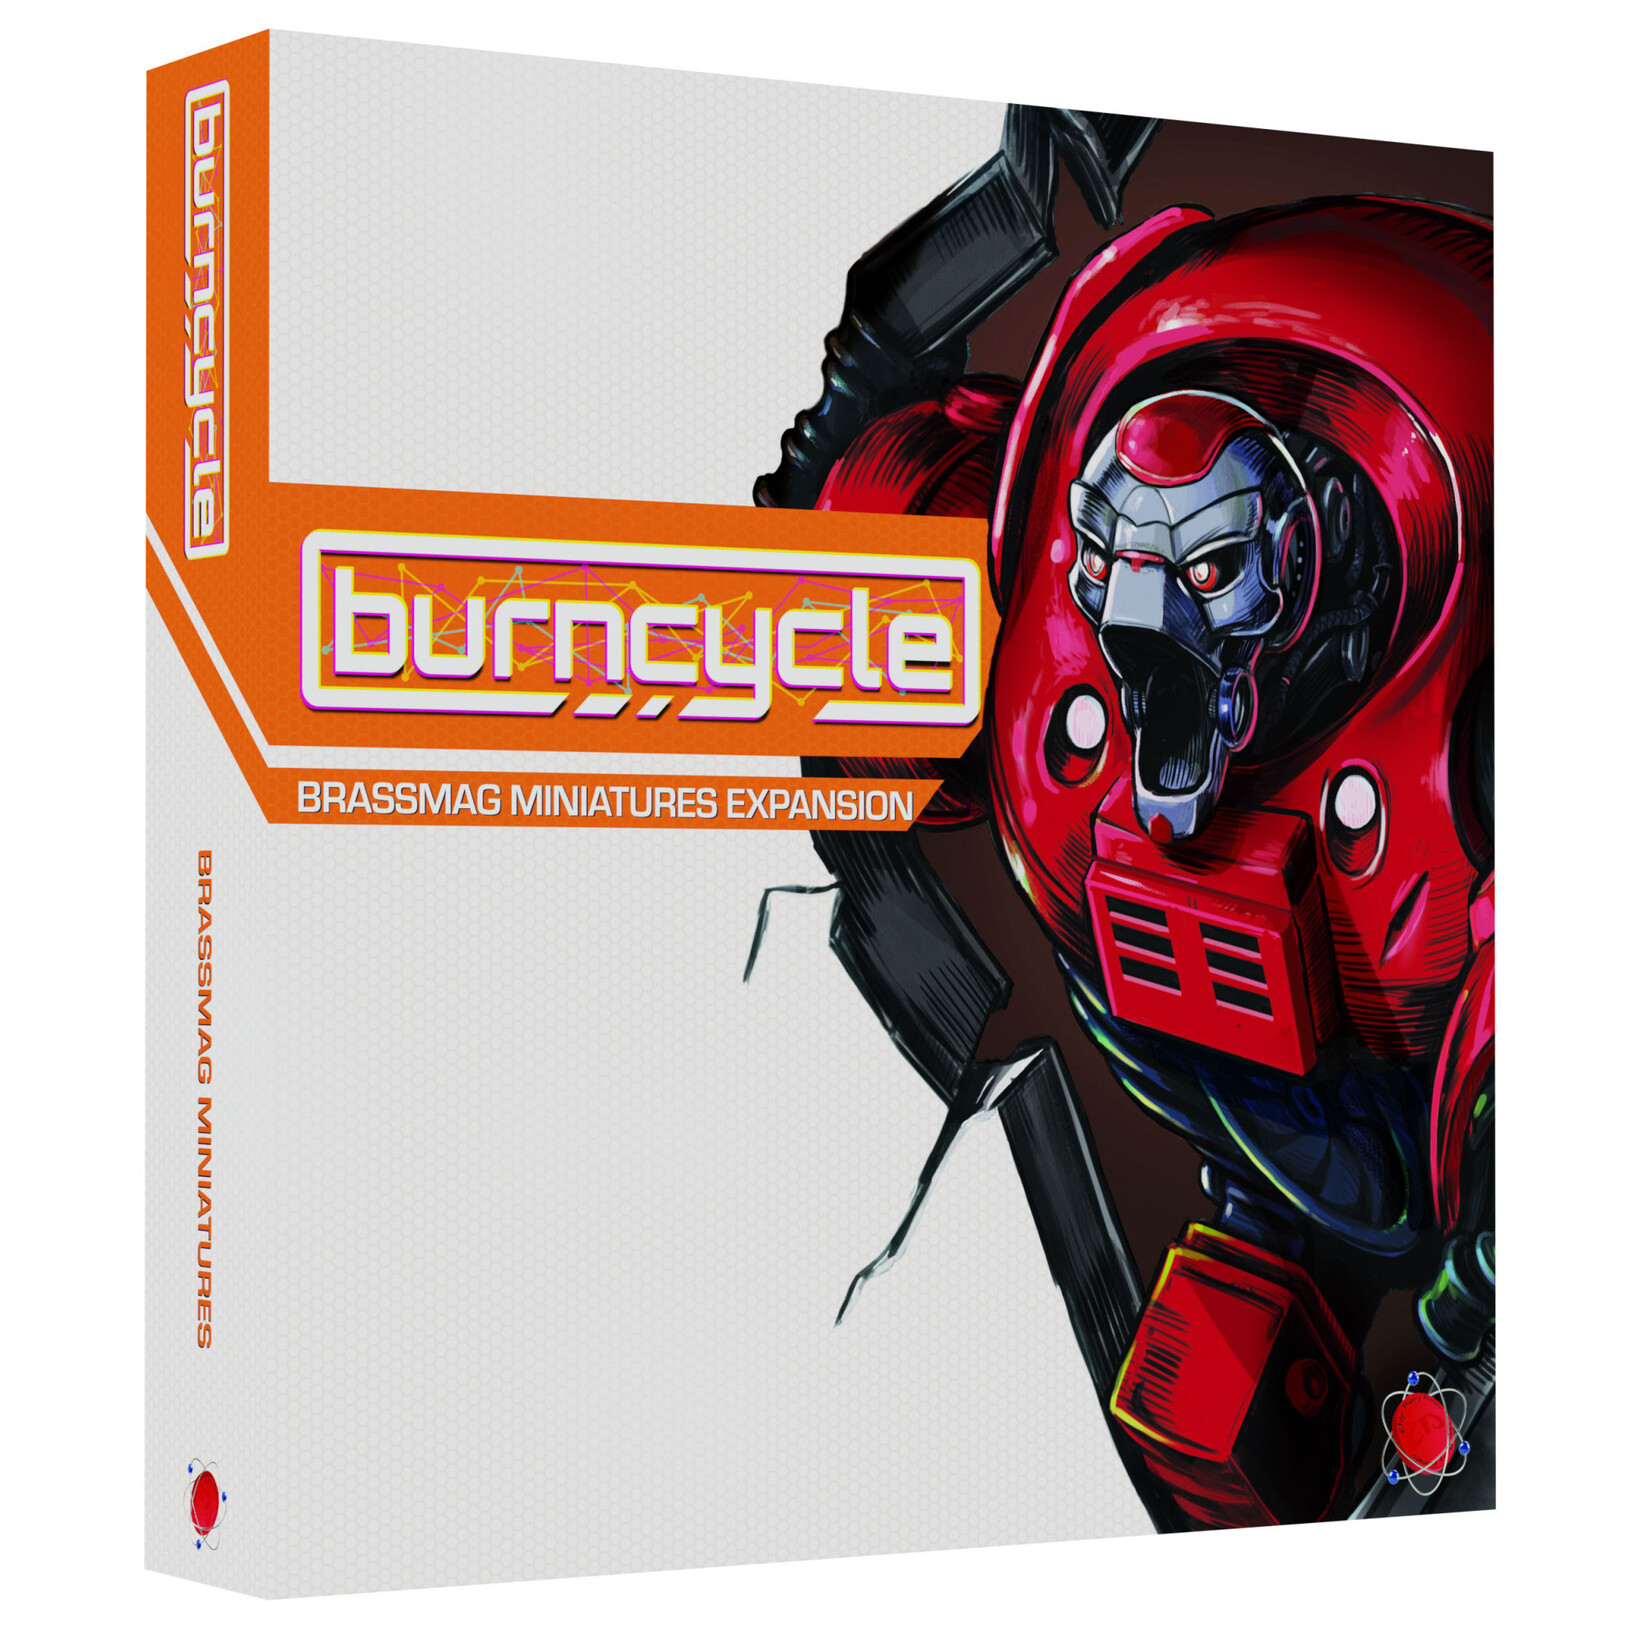 burncycle: Bot and Guard BrassMag Figures